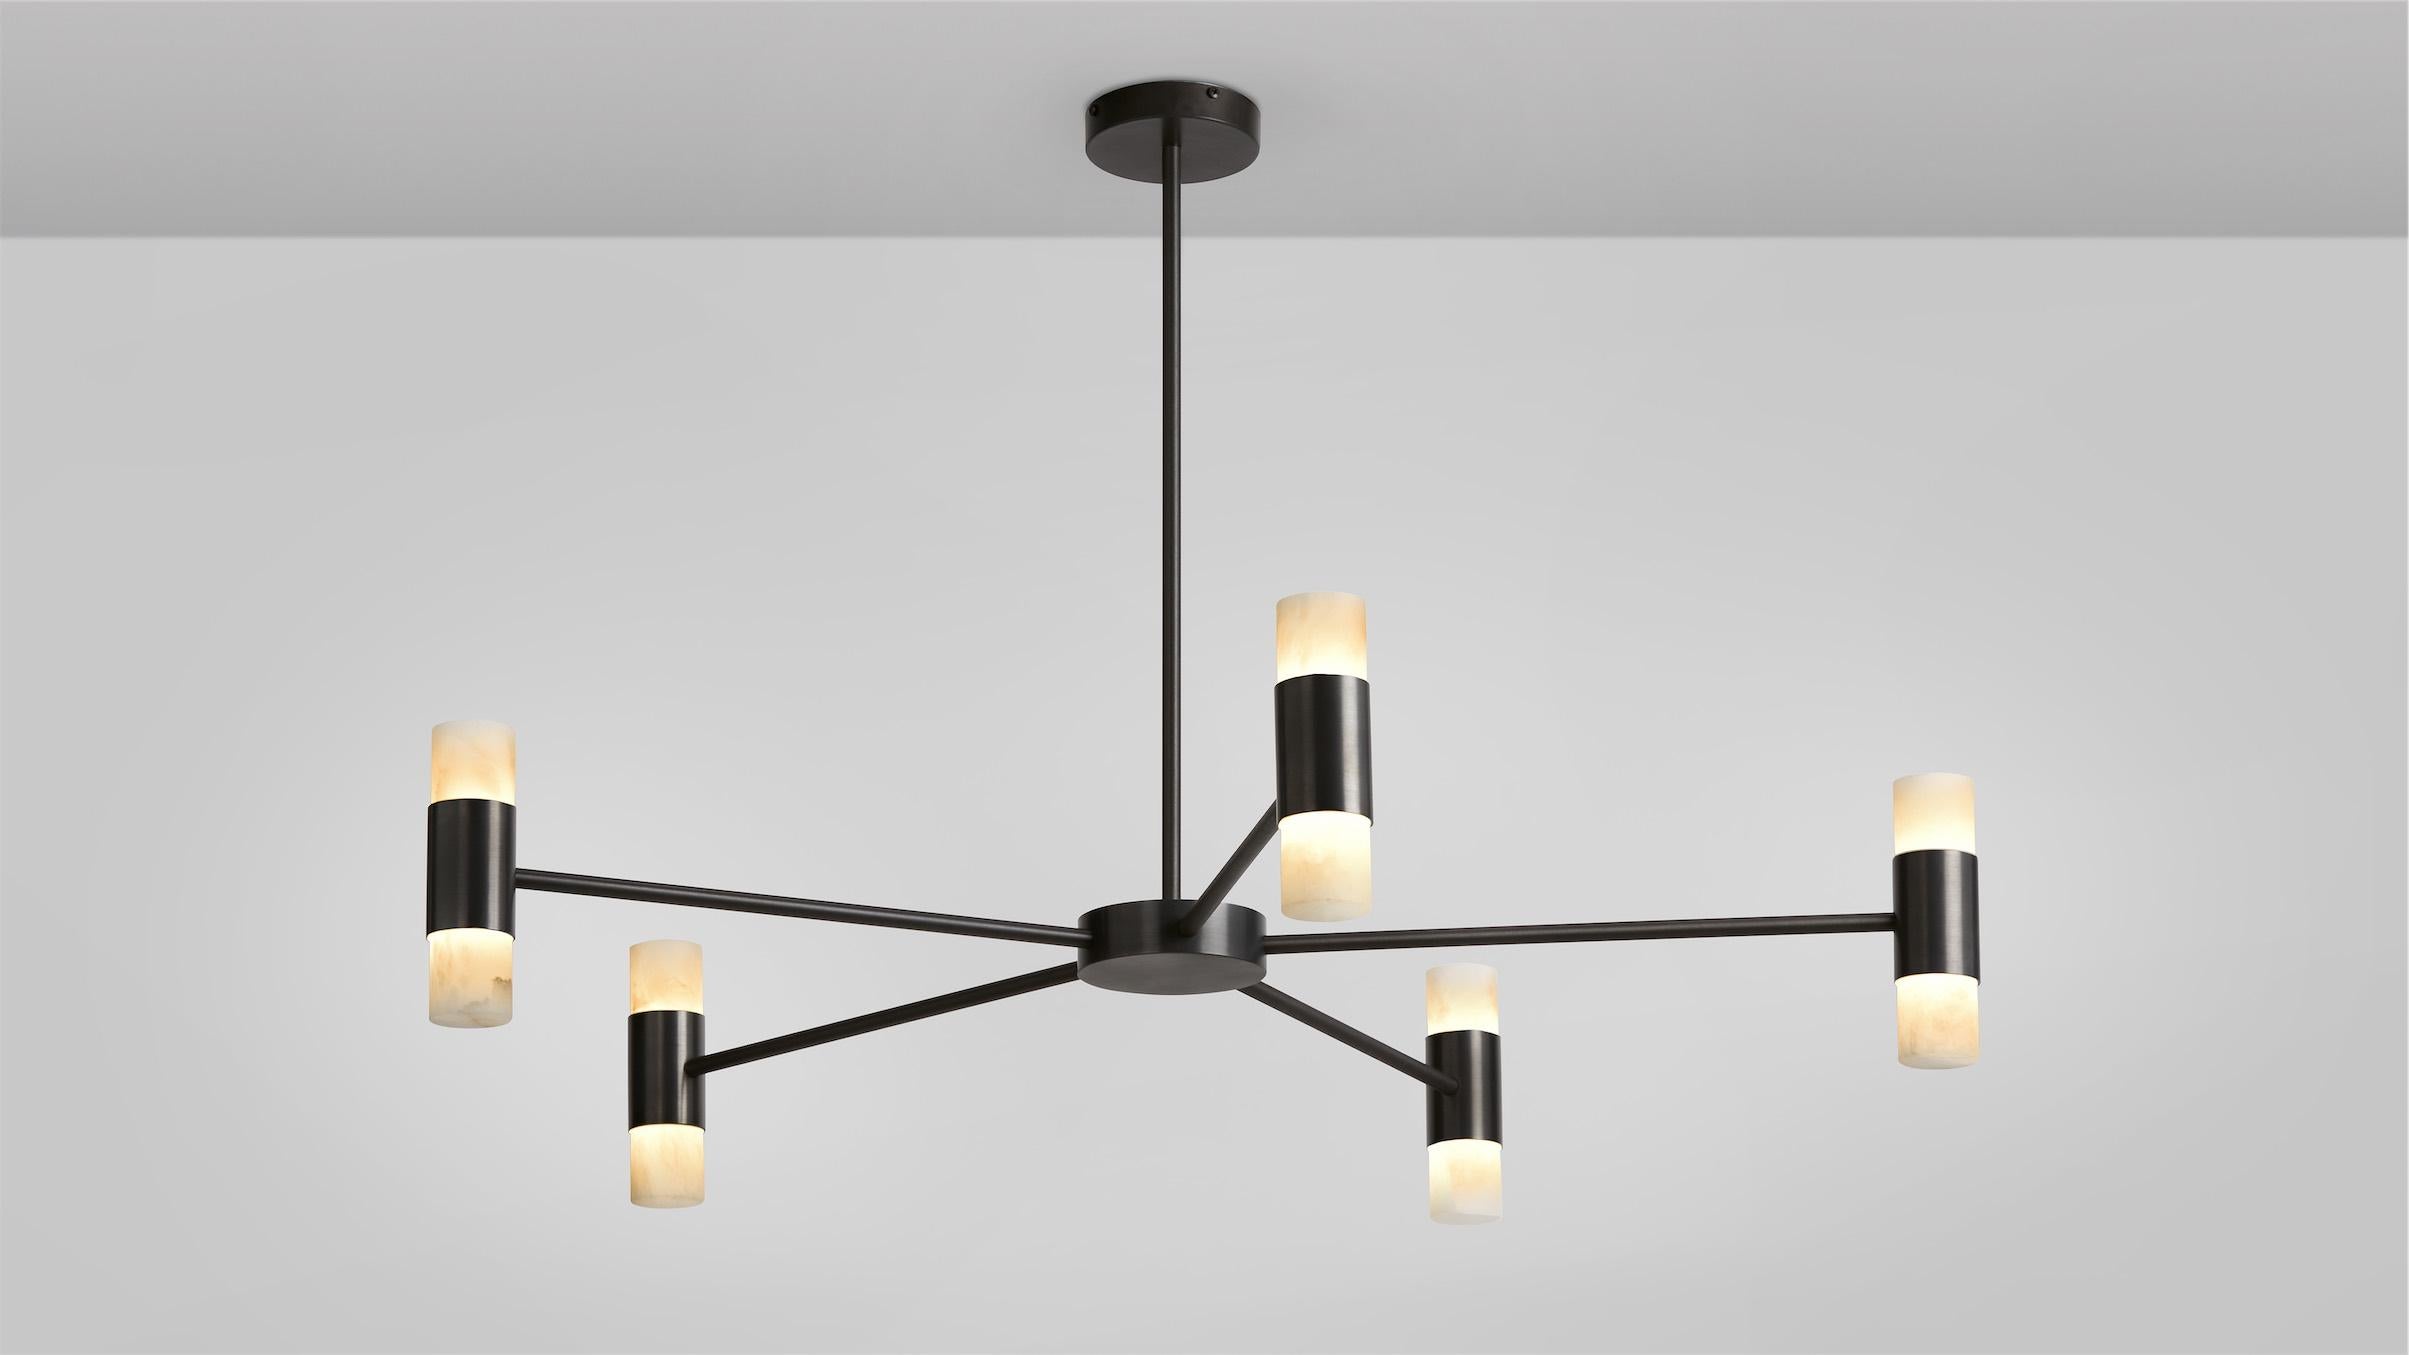 Roma pendant by CTO Lighting
Materials: bronze, alabaster.
Dimensions: H 29 x D 101 cm
Available in satin brass and bronze.

Celebrating the simplicity of line and form, The Roma collection is designed to highlight the noble quality of materials.